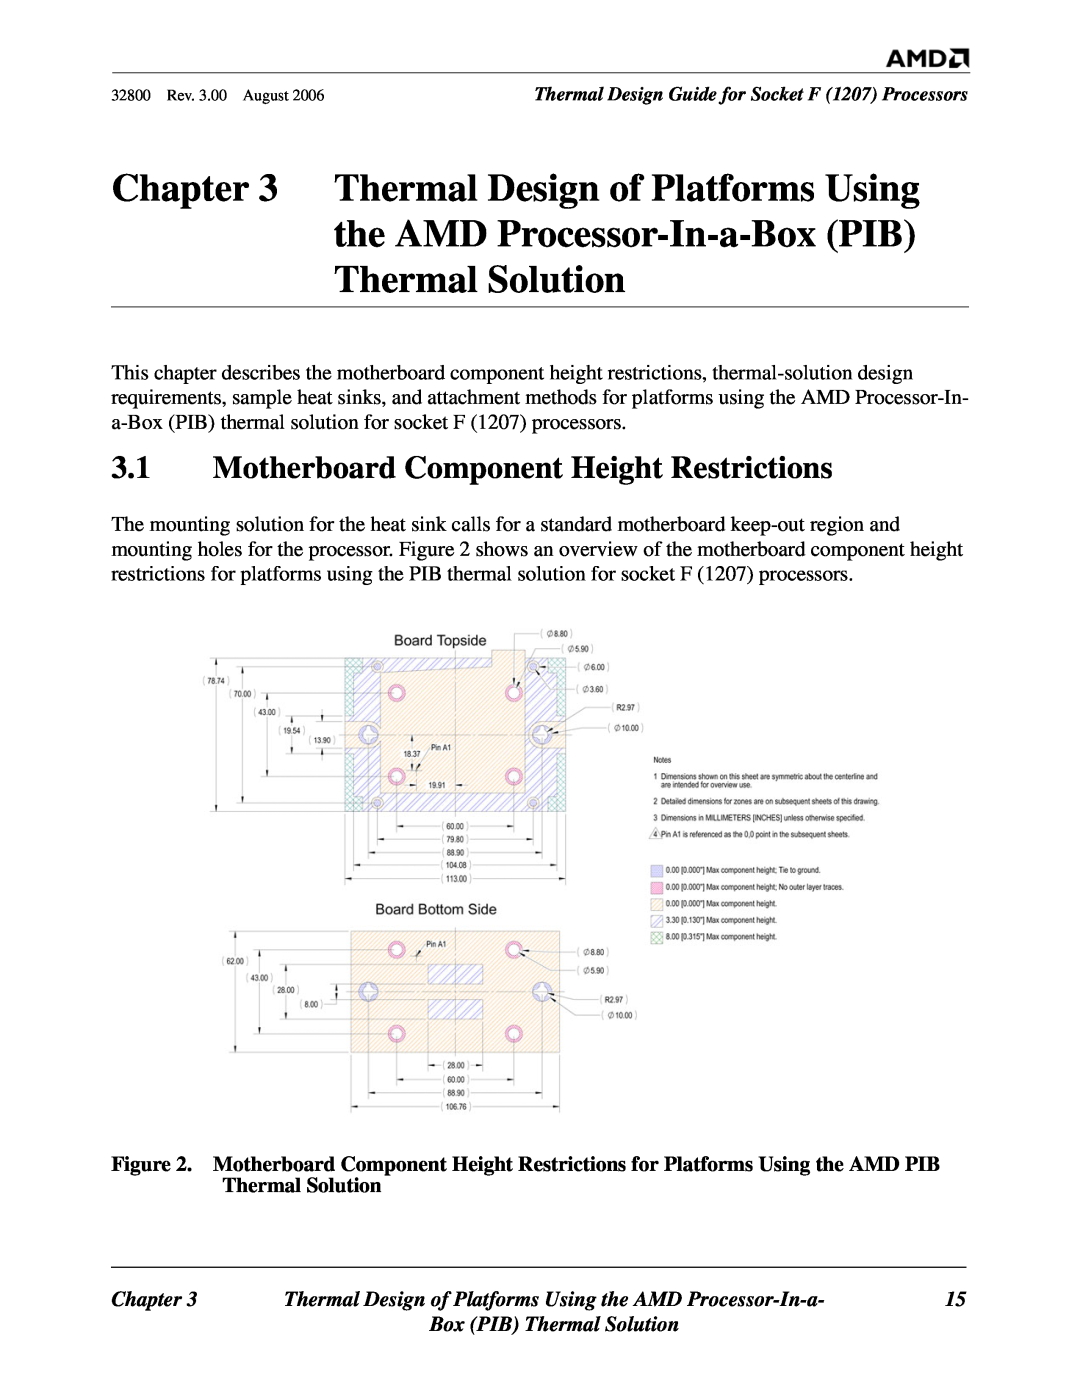 AMD 1207 manual Thermal Design of Platforms Using, the AMD Processor-In-a-Box PIB Thermal Solution, Chapter 